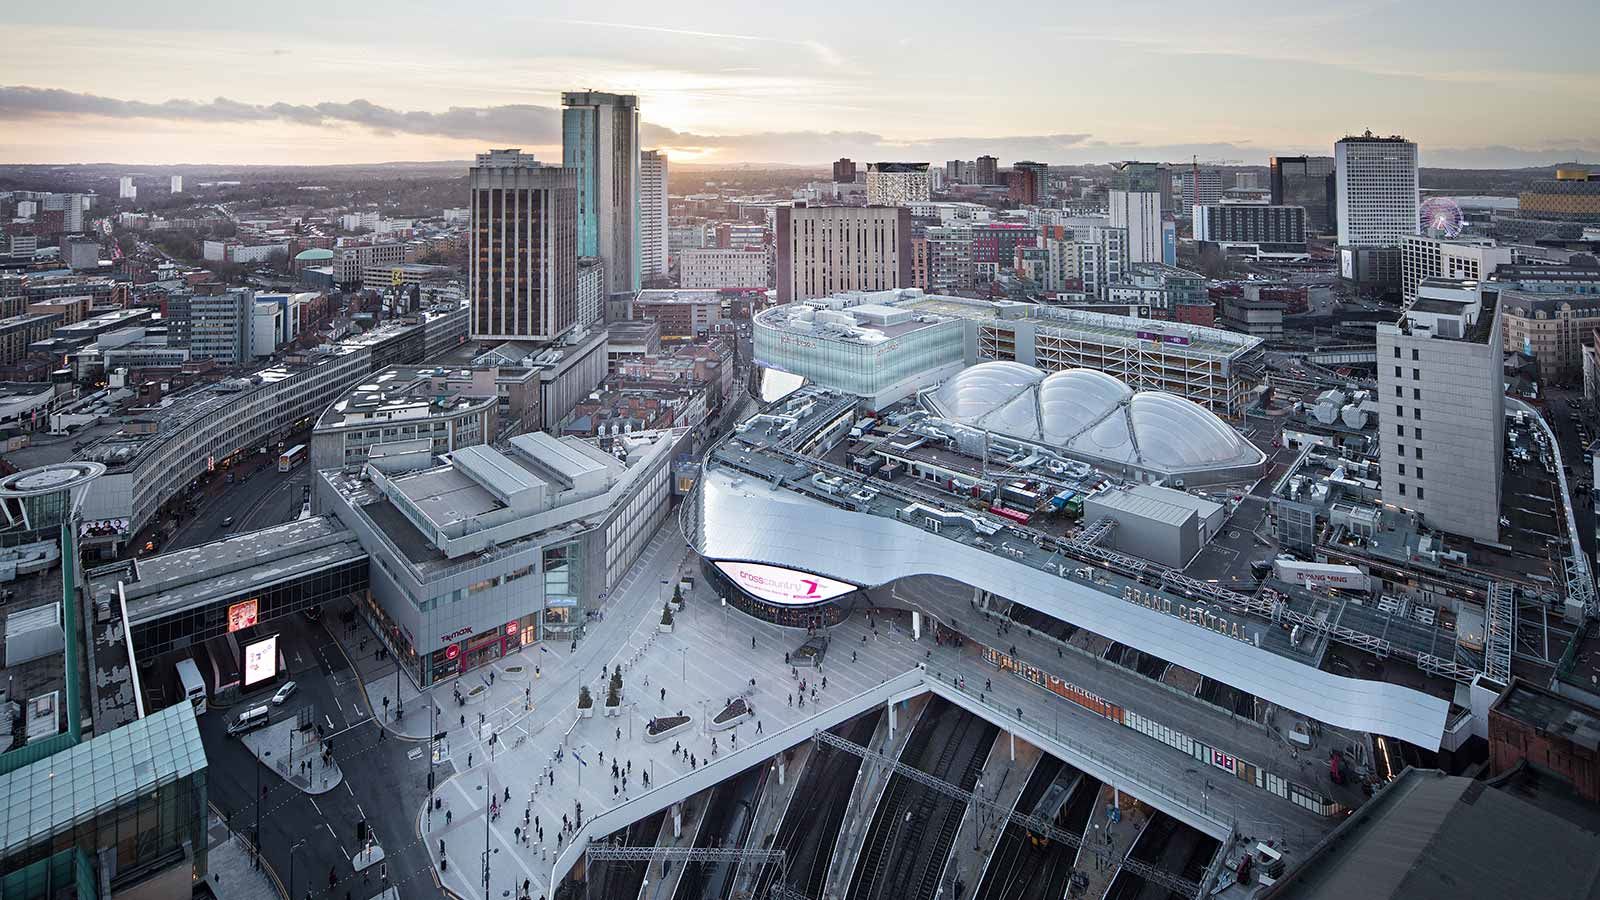 Birmingham New Street Station Aerial View - Mace Group